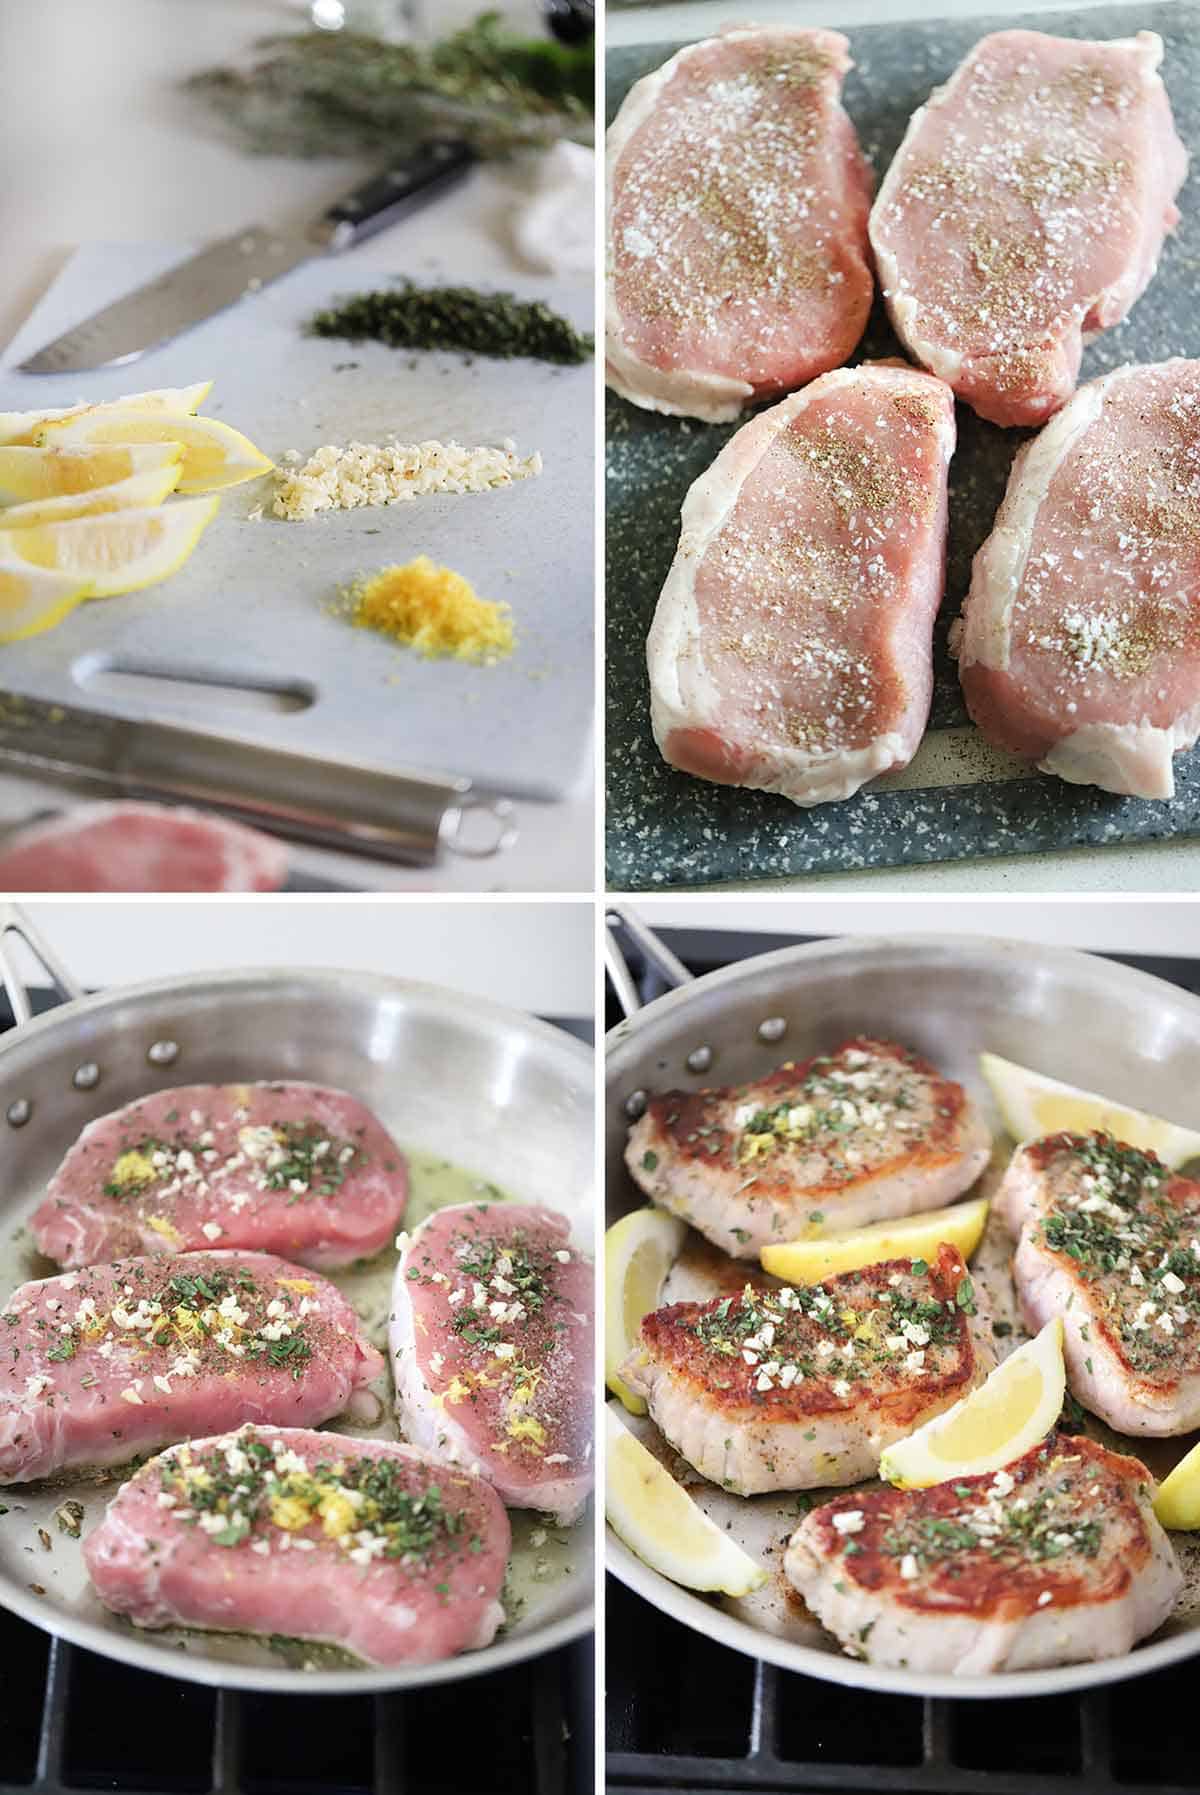 Process collage showing how to sear garlic and herb pork chops with lemon.